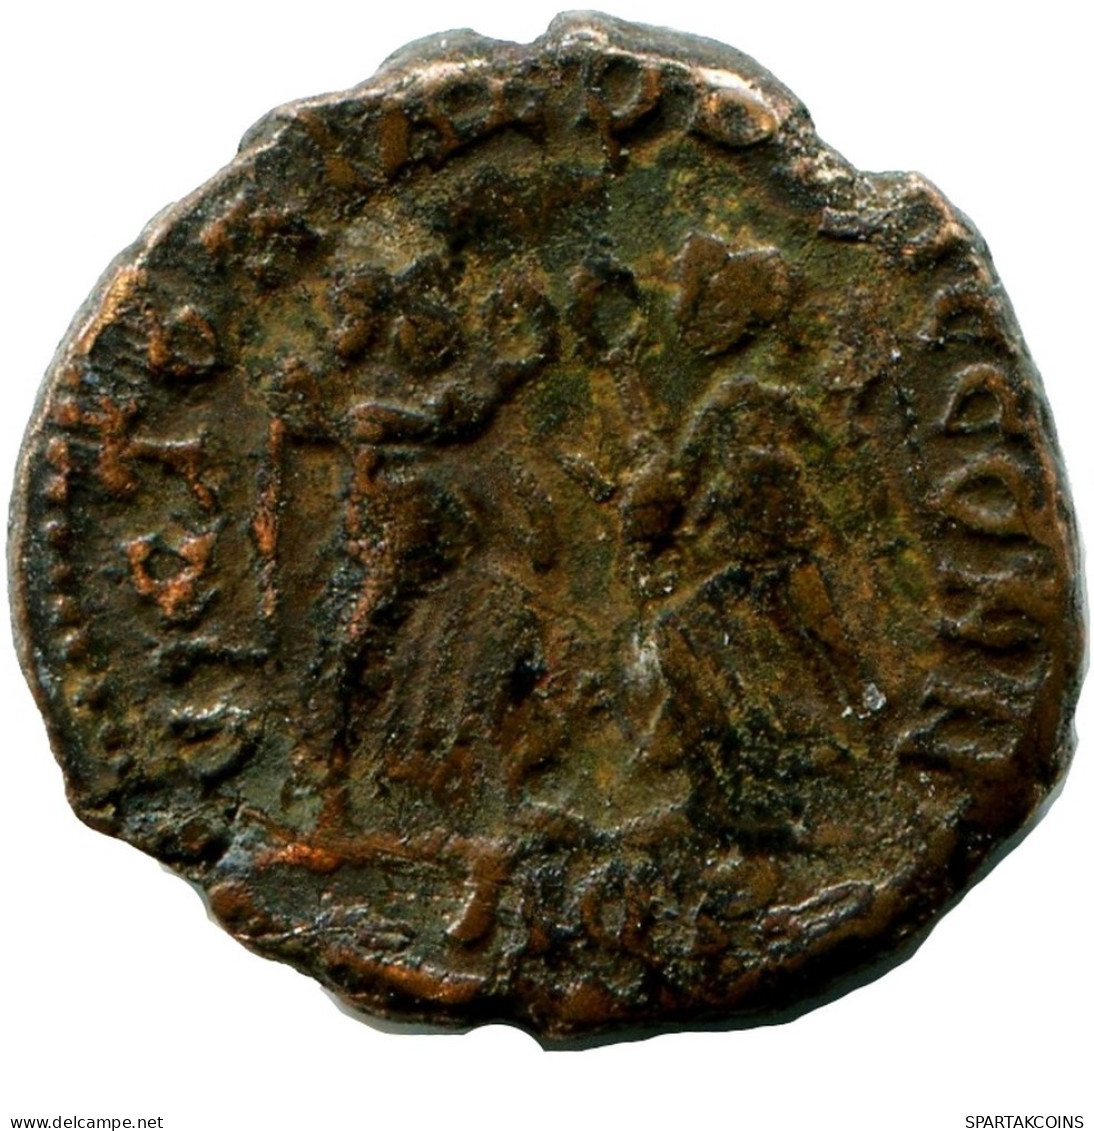 CONSTANS MINTED IN AGUILEIA ITALY FOUND IN IHNASYAH HOARD EGYPT #ANC11550.14.D.A - El Impero Christiano (307 / 363)